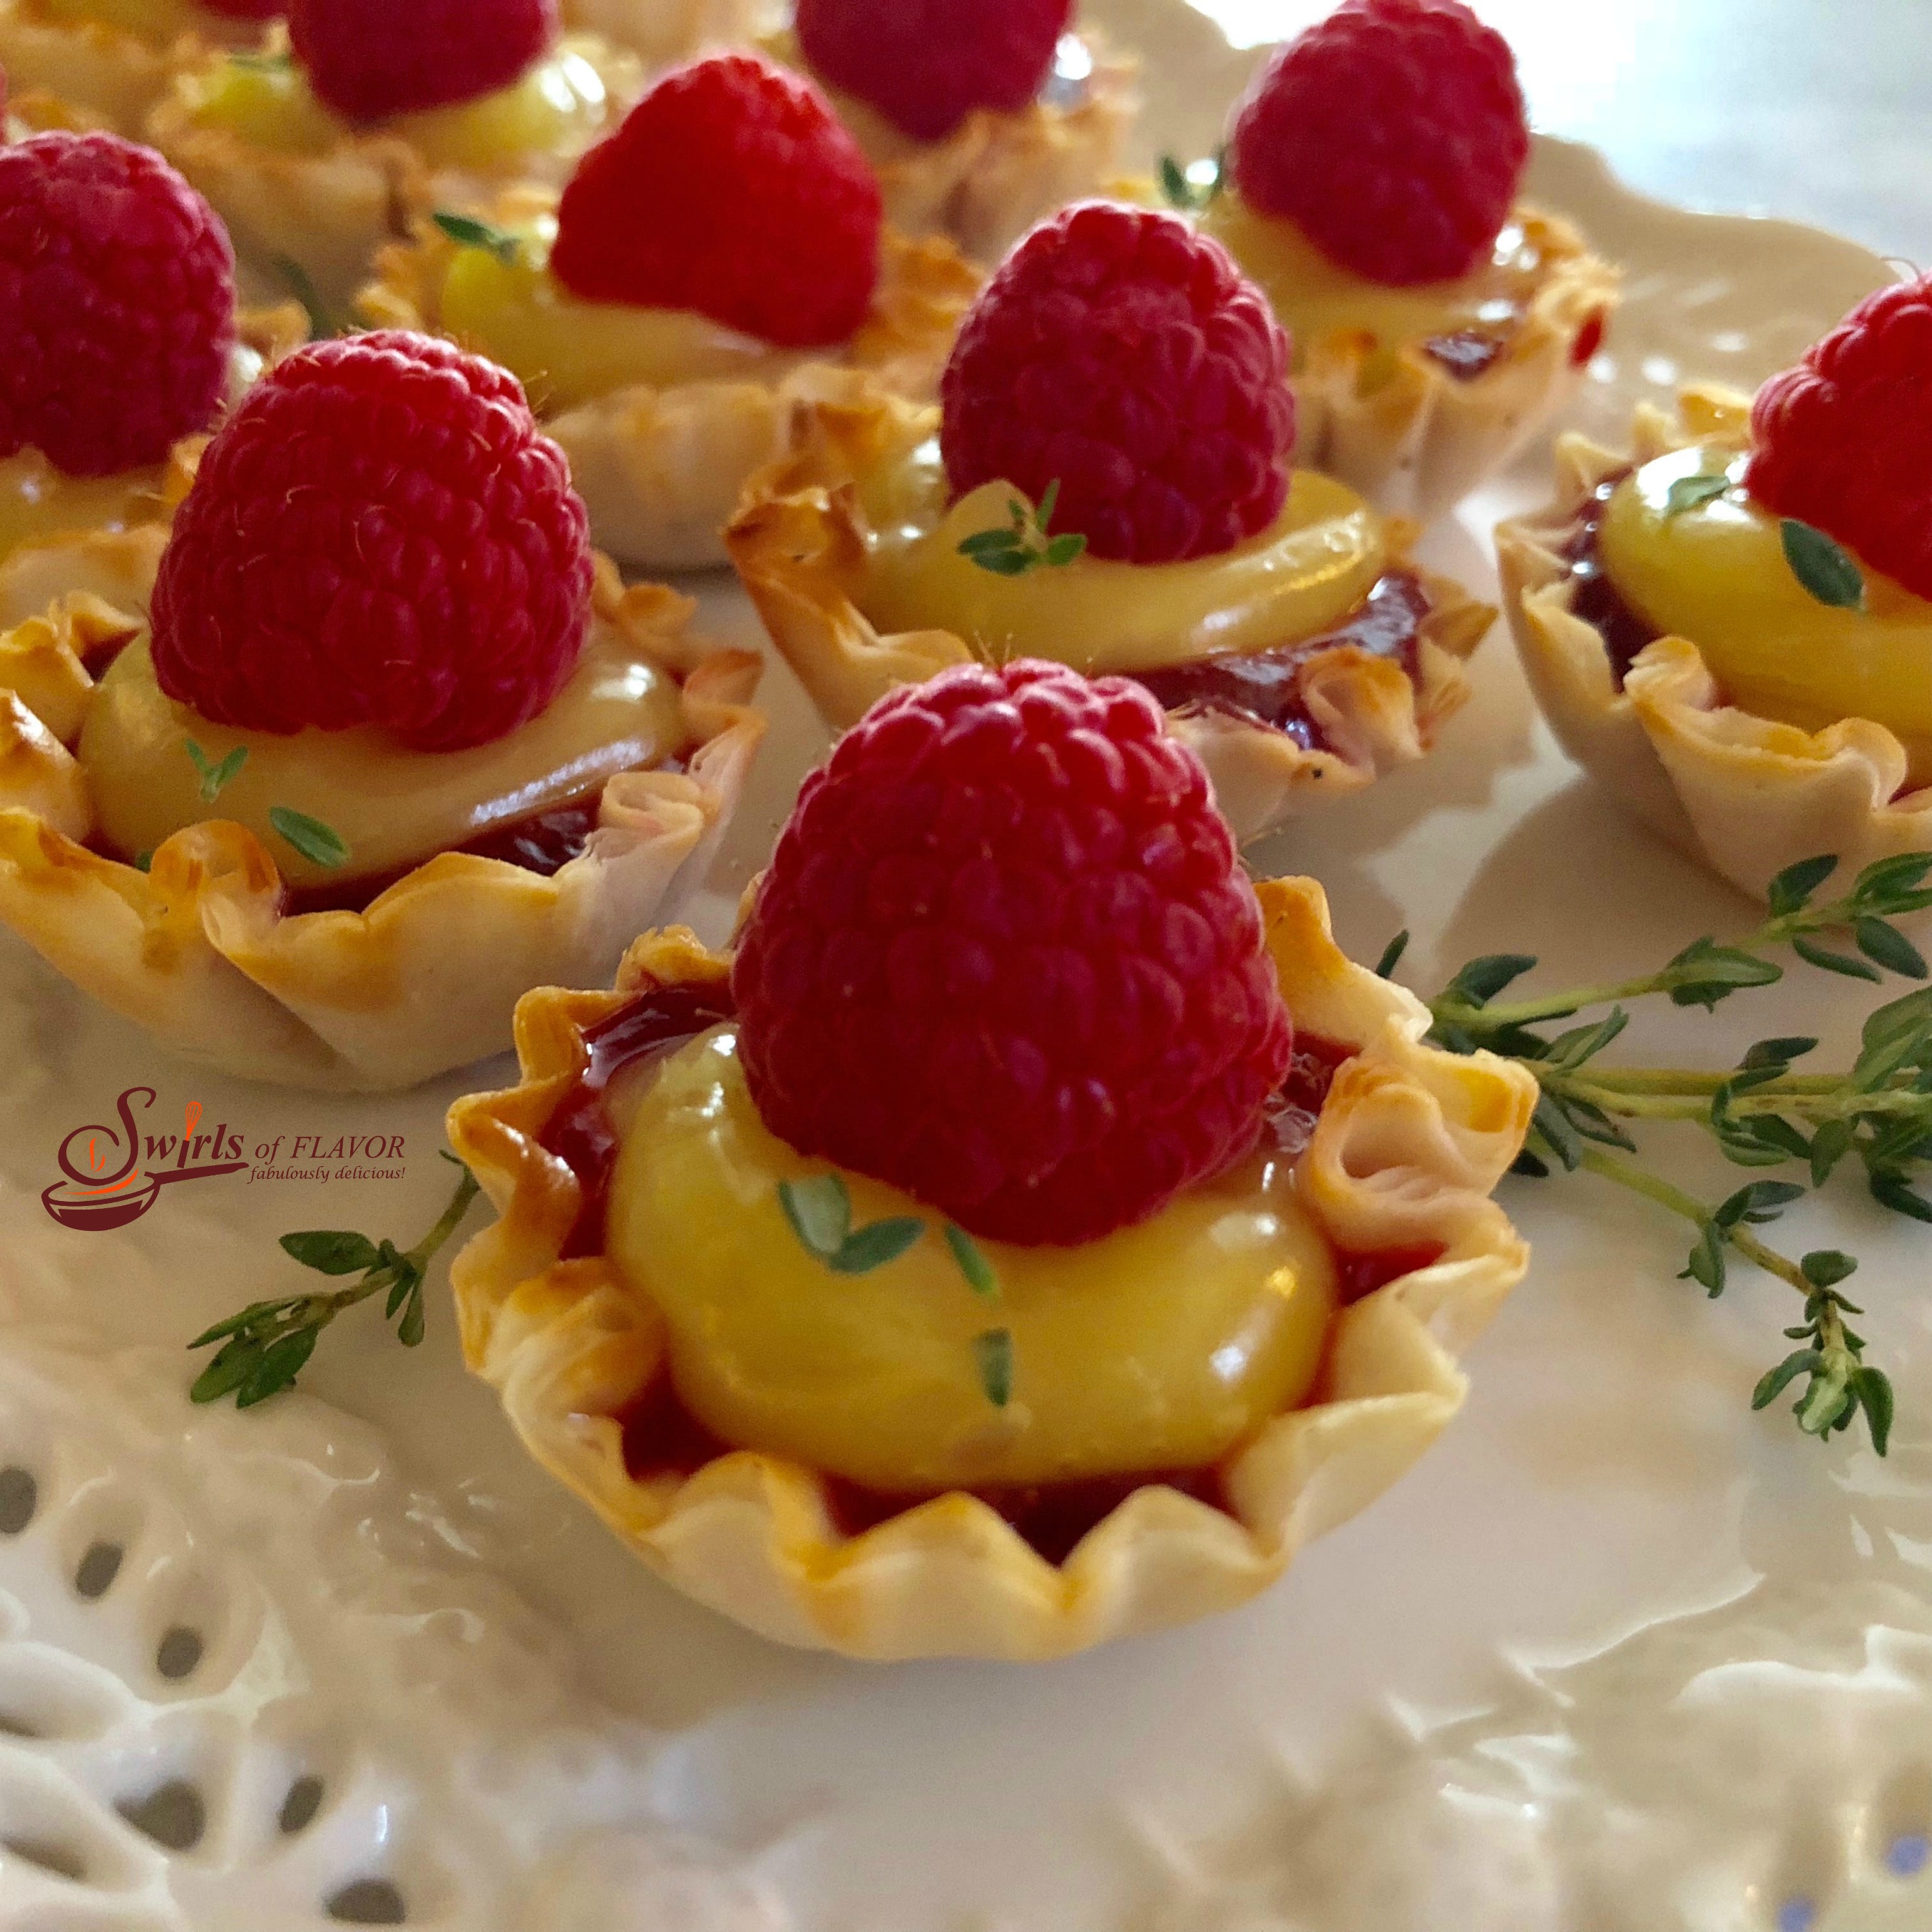 No-Bake Raspberry Lemon Thyme Tartlets are a 5 ingredient quick and easy dessert that's bursting with spring flavors and fruity sweetness! lemon | raspberry | thyme | fillo shells | mini dessert | no bake | no cooking | fresh herbs | easy recipe | #swirlsofflavor